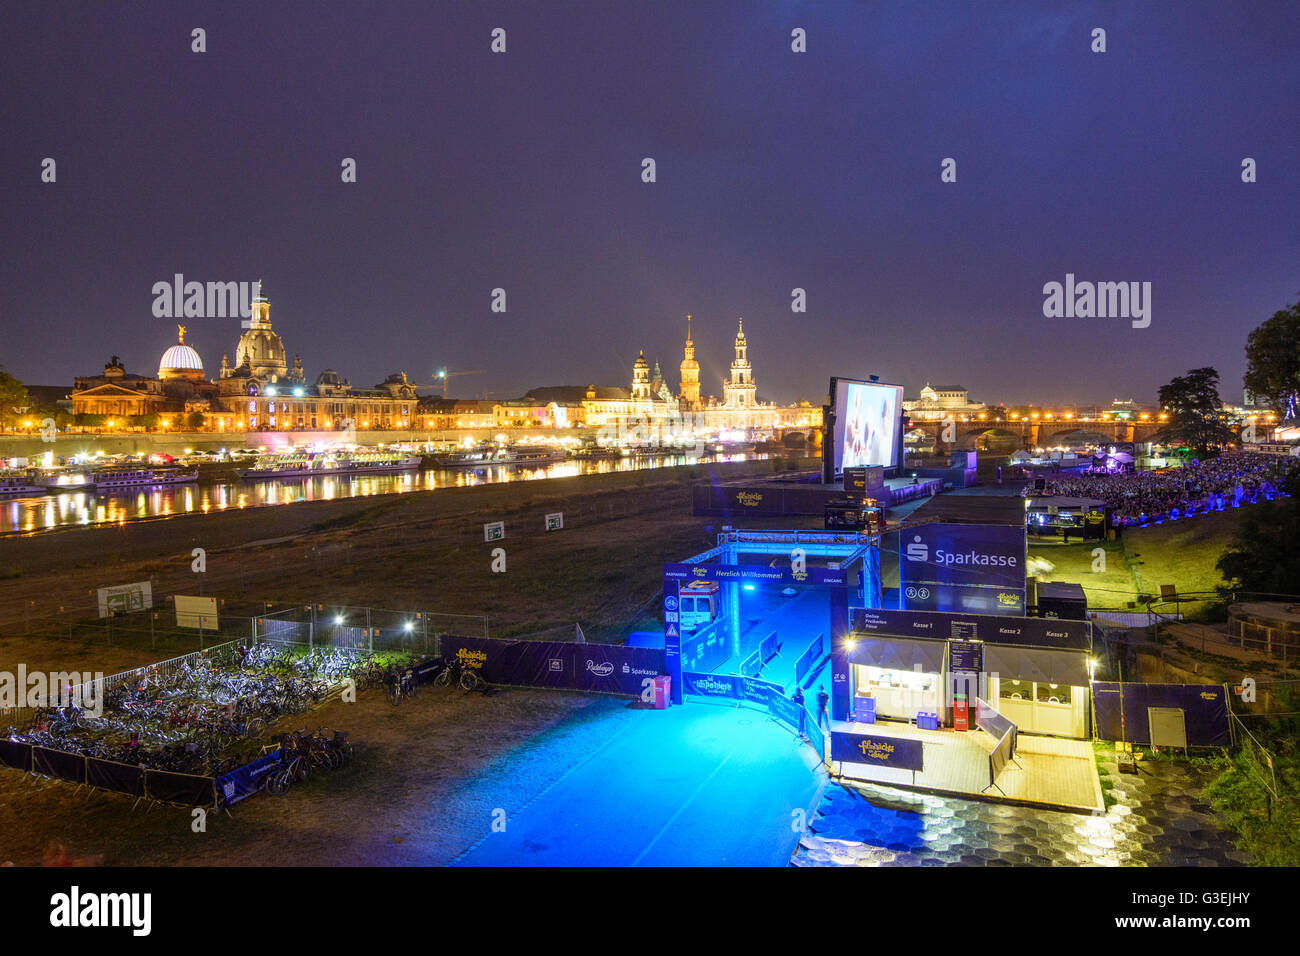 Movie Nights at the Elbe river , in the background Frauenkirche , Hofkirche , Palace and Augustus Bridge, Germany, Sachsen, Saxo Stock Photo